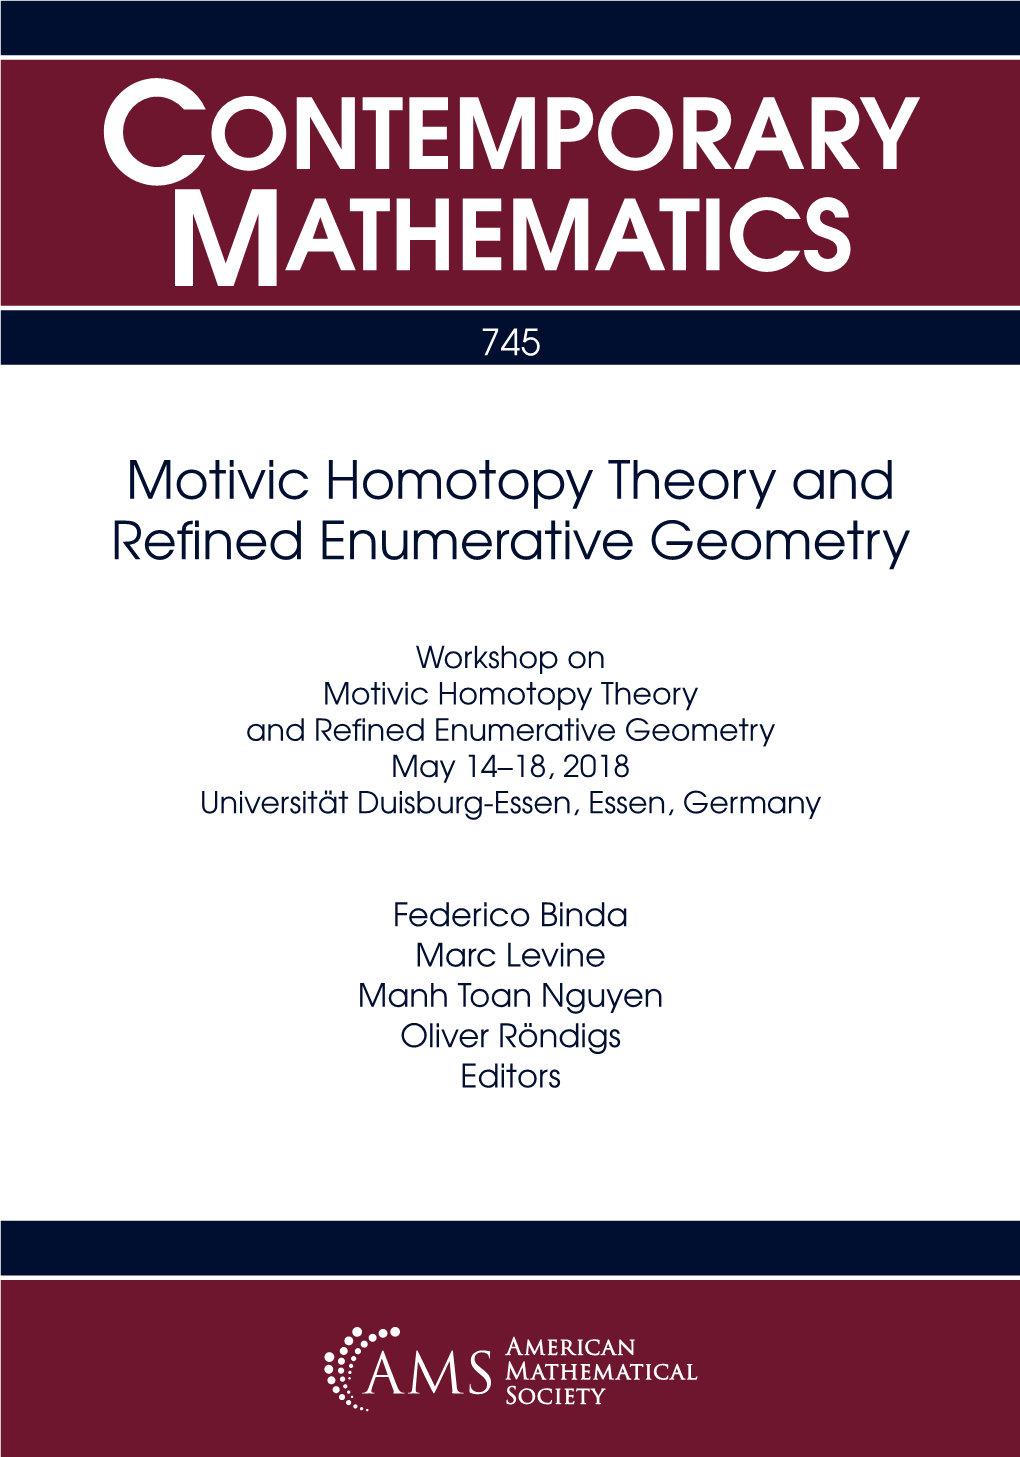 Motivic Homotopy Theory and Refined Enumerative Geometry